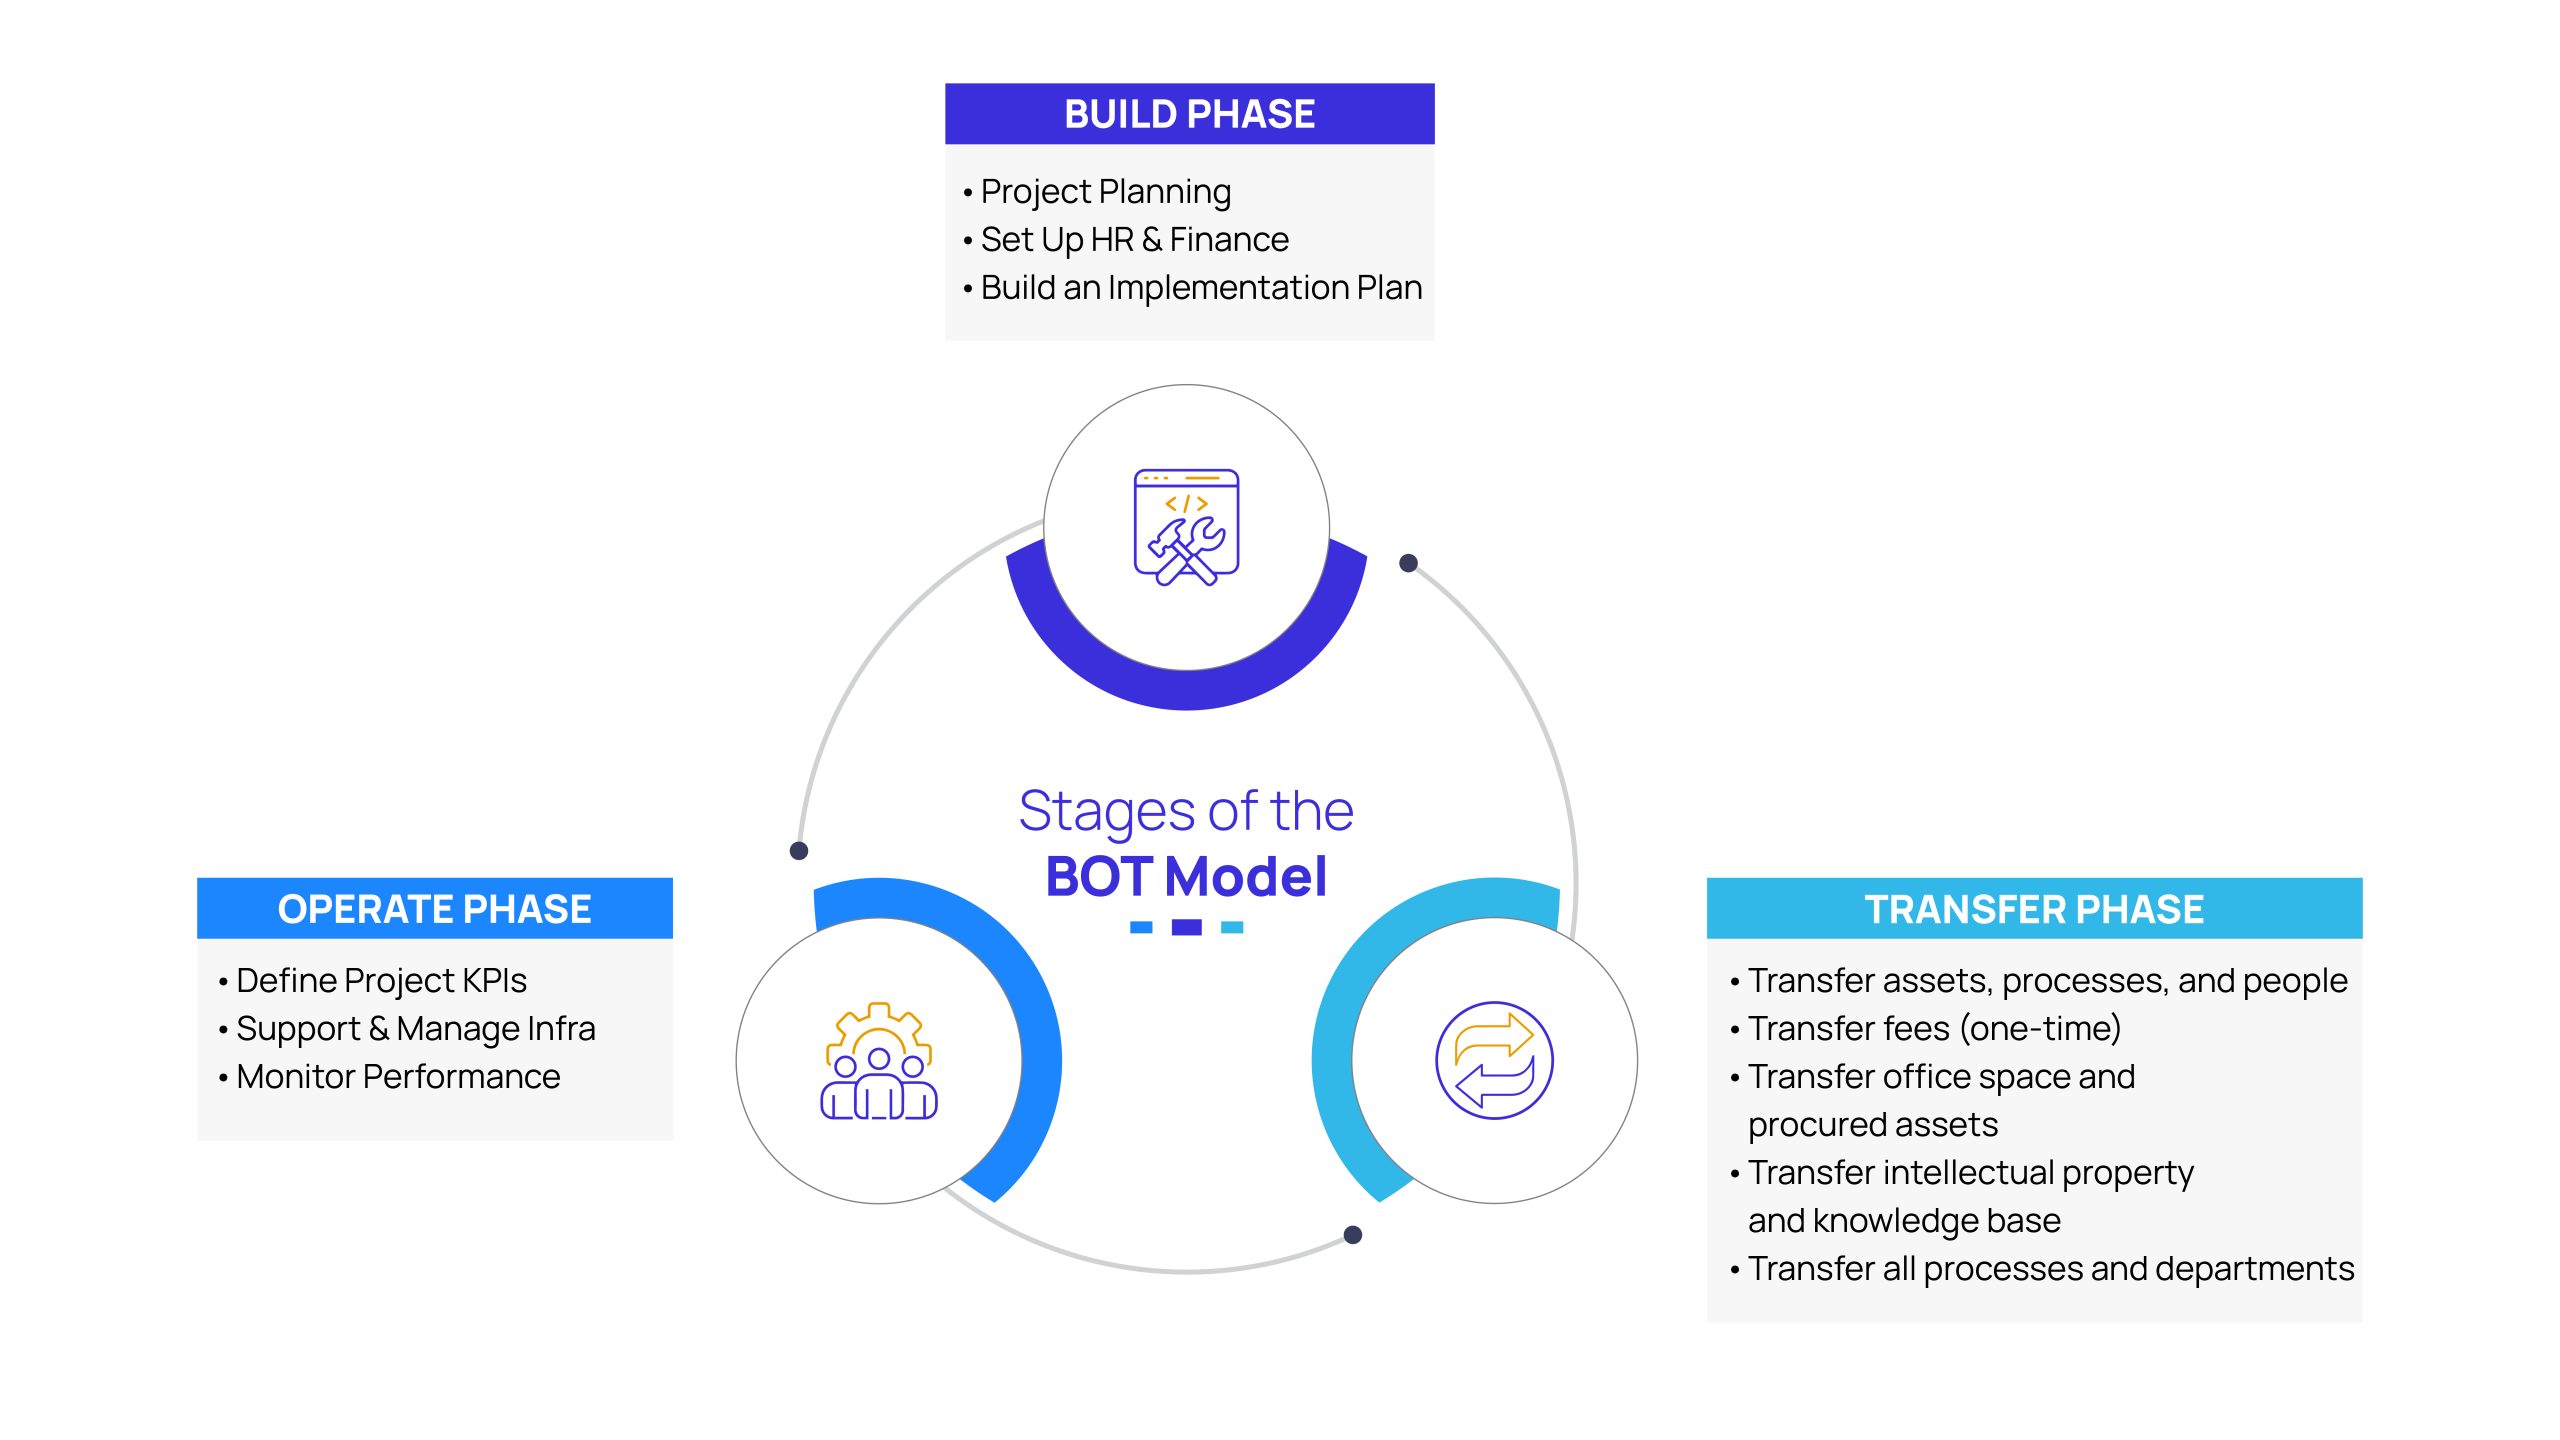 Stages of the BOT Model